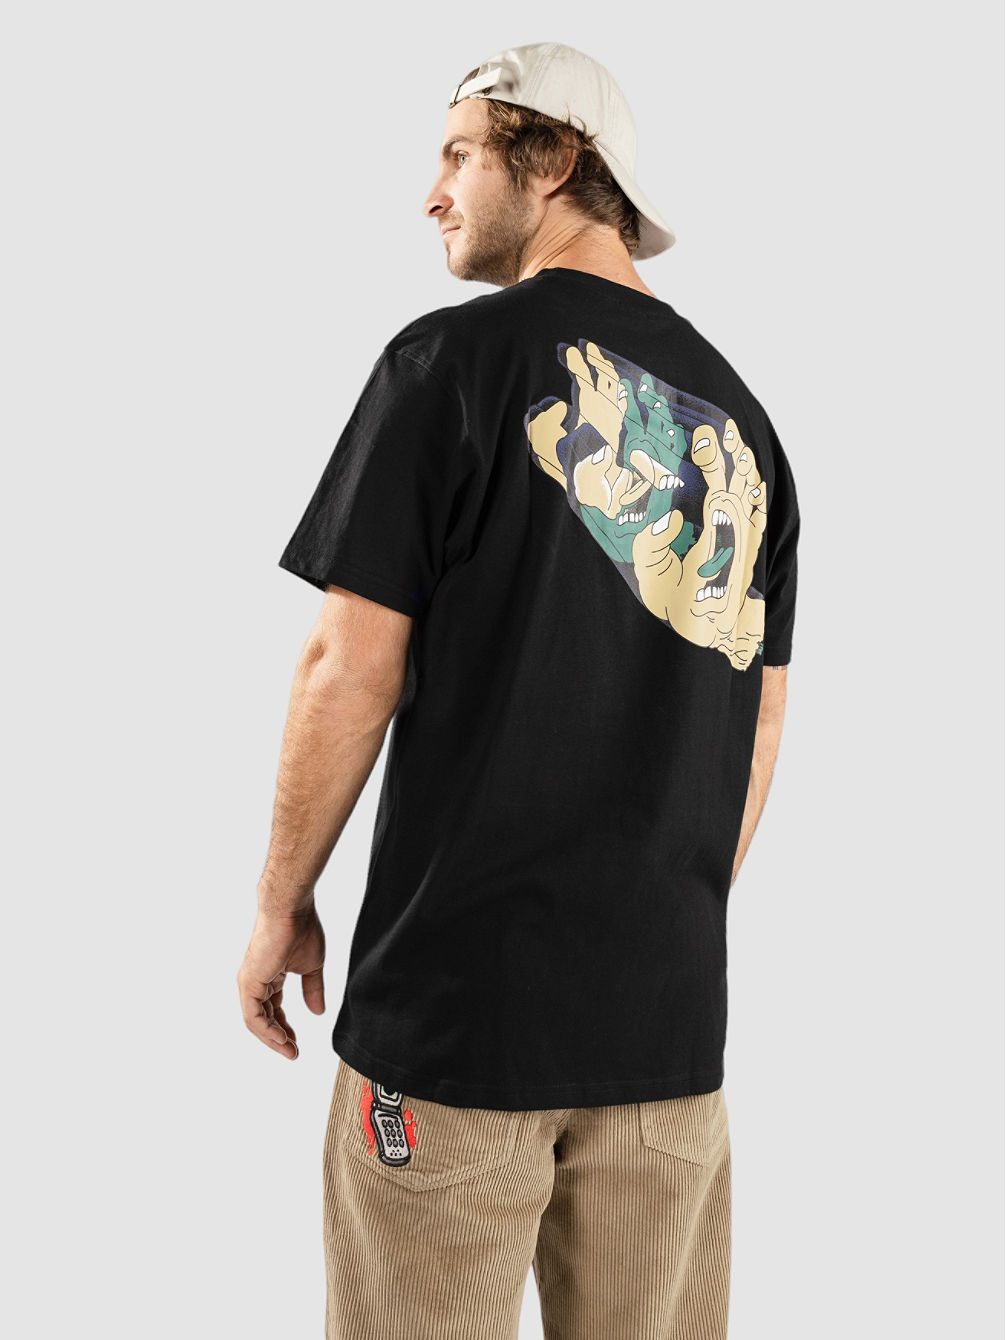 Dissect Hand Front T-Shirt